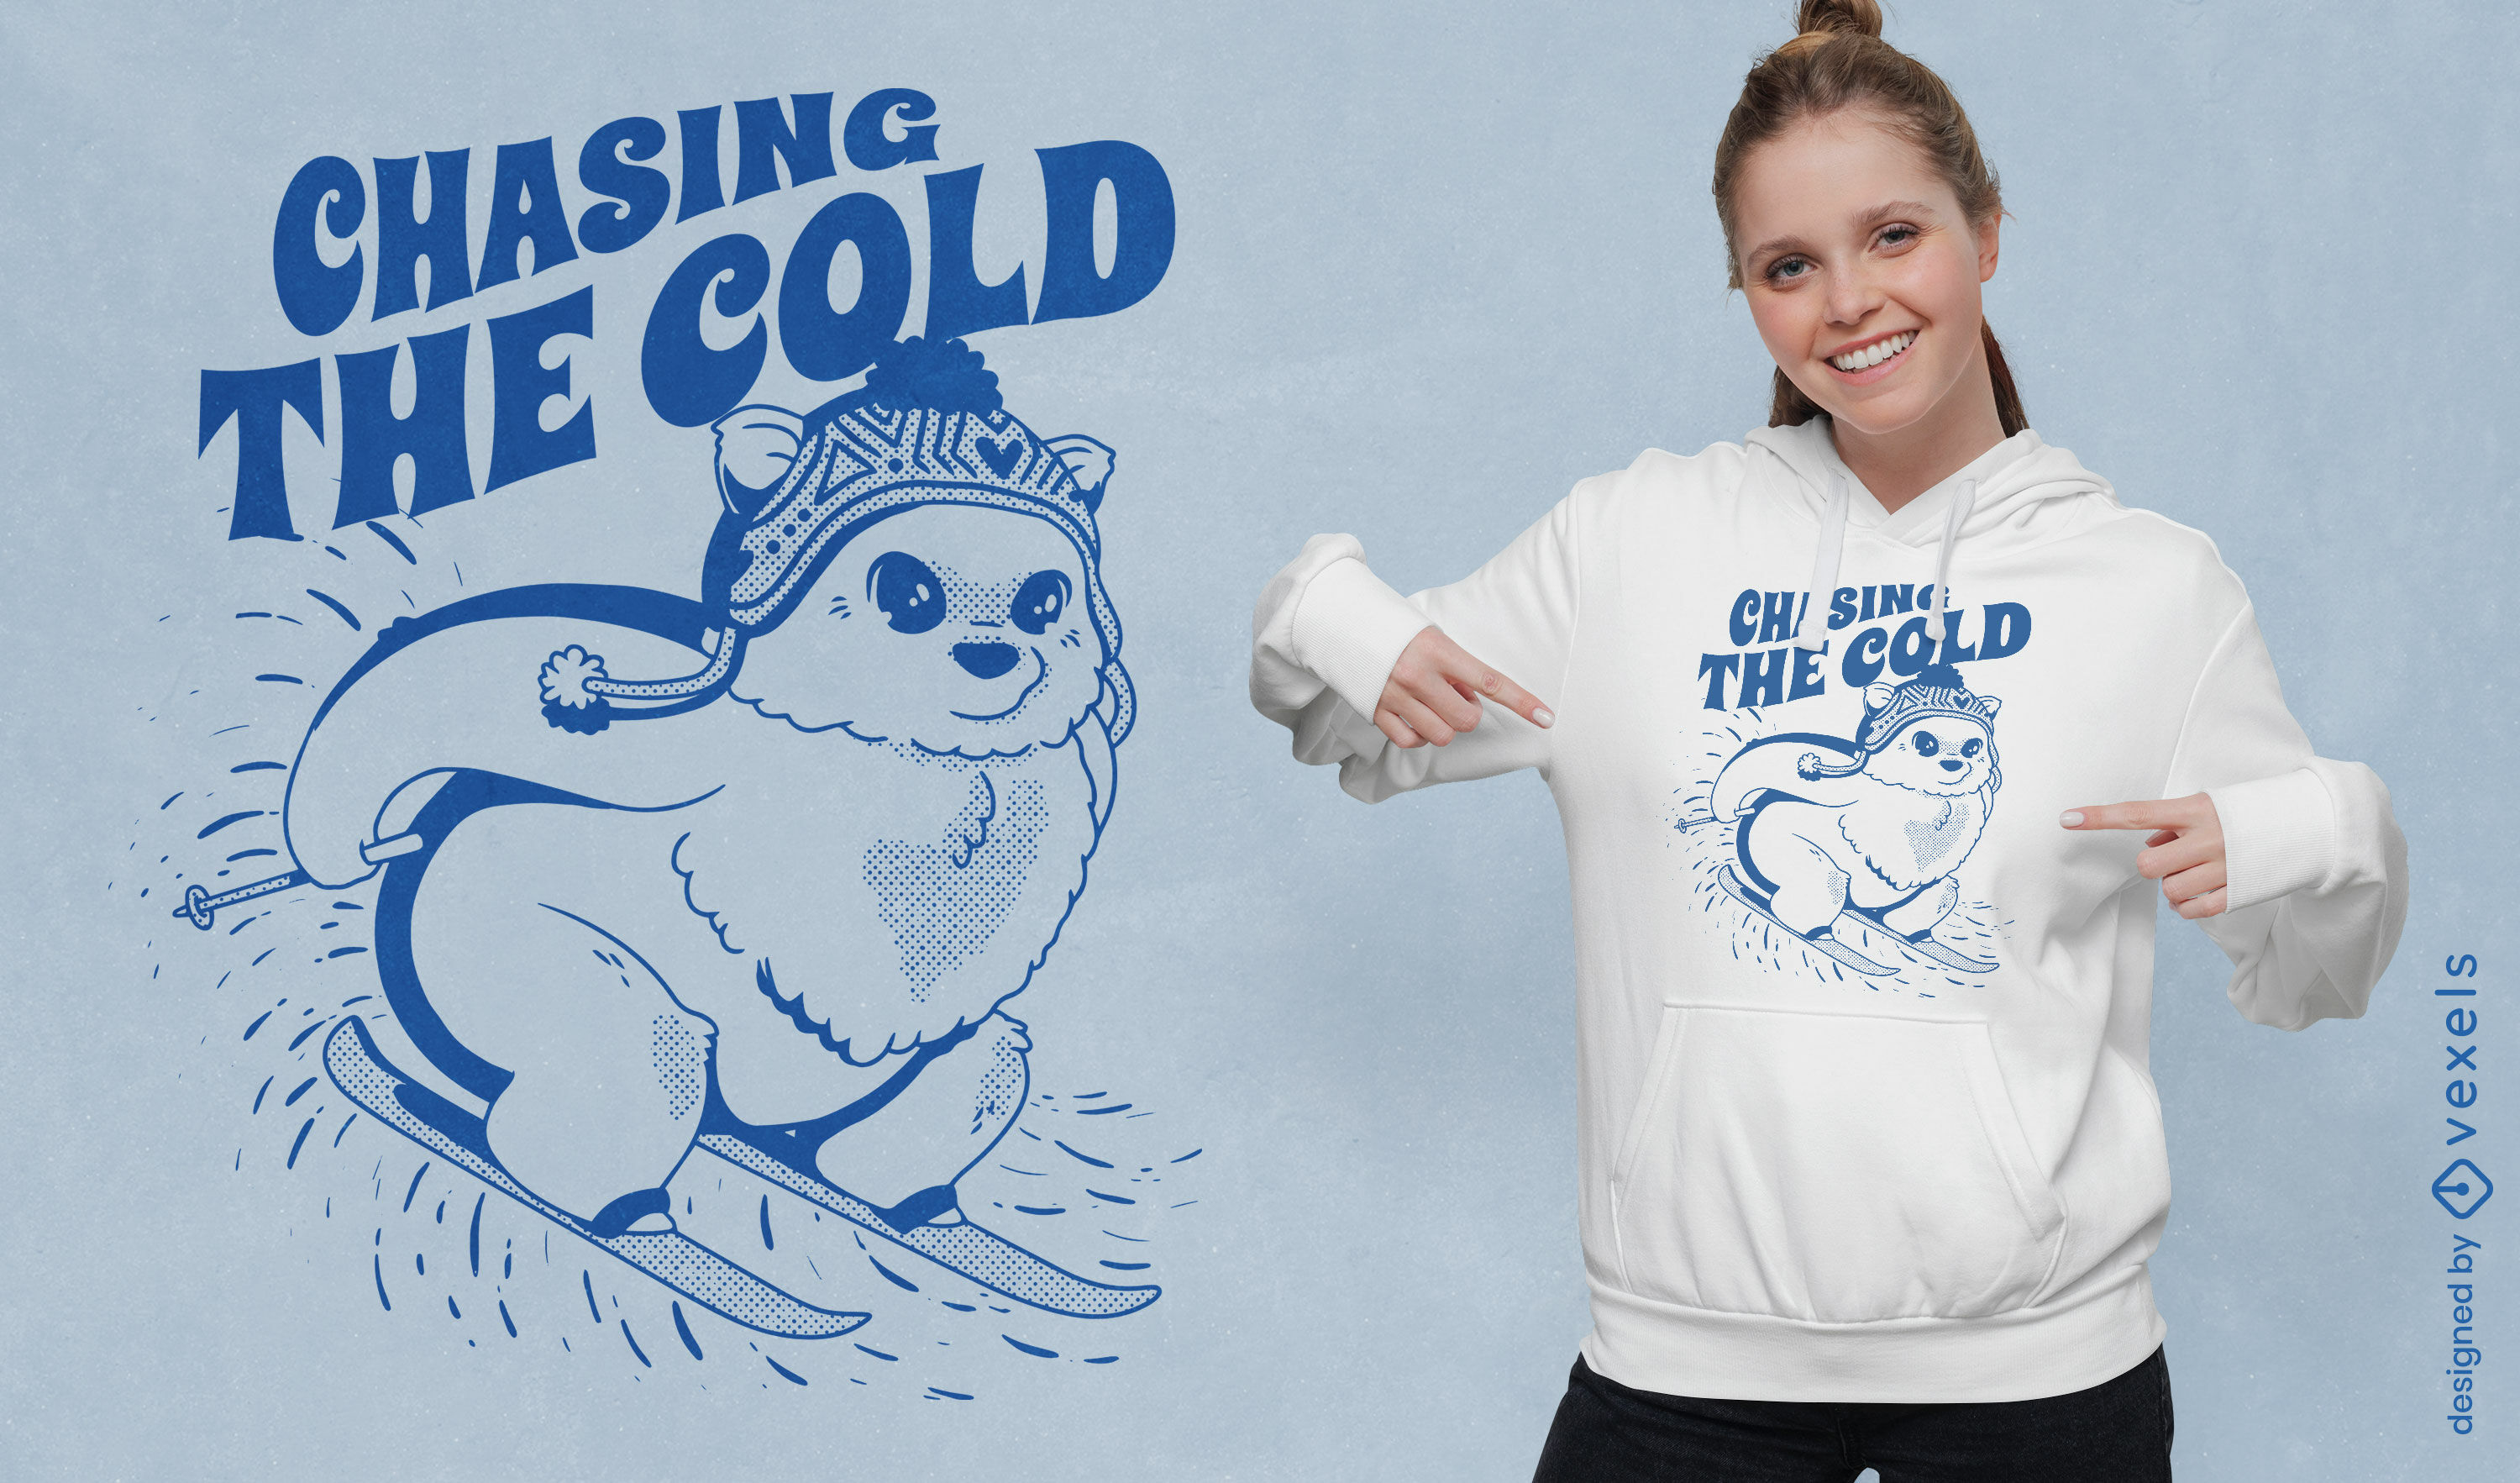 Chasing the cold t-shirt design